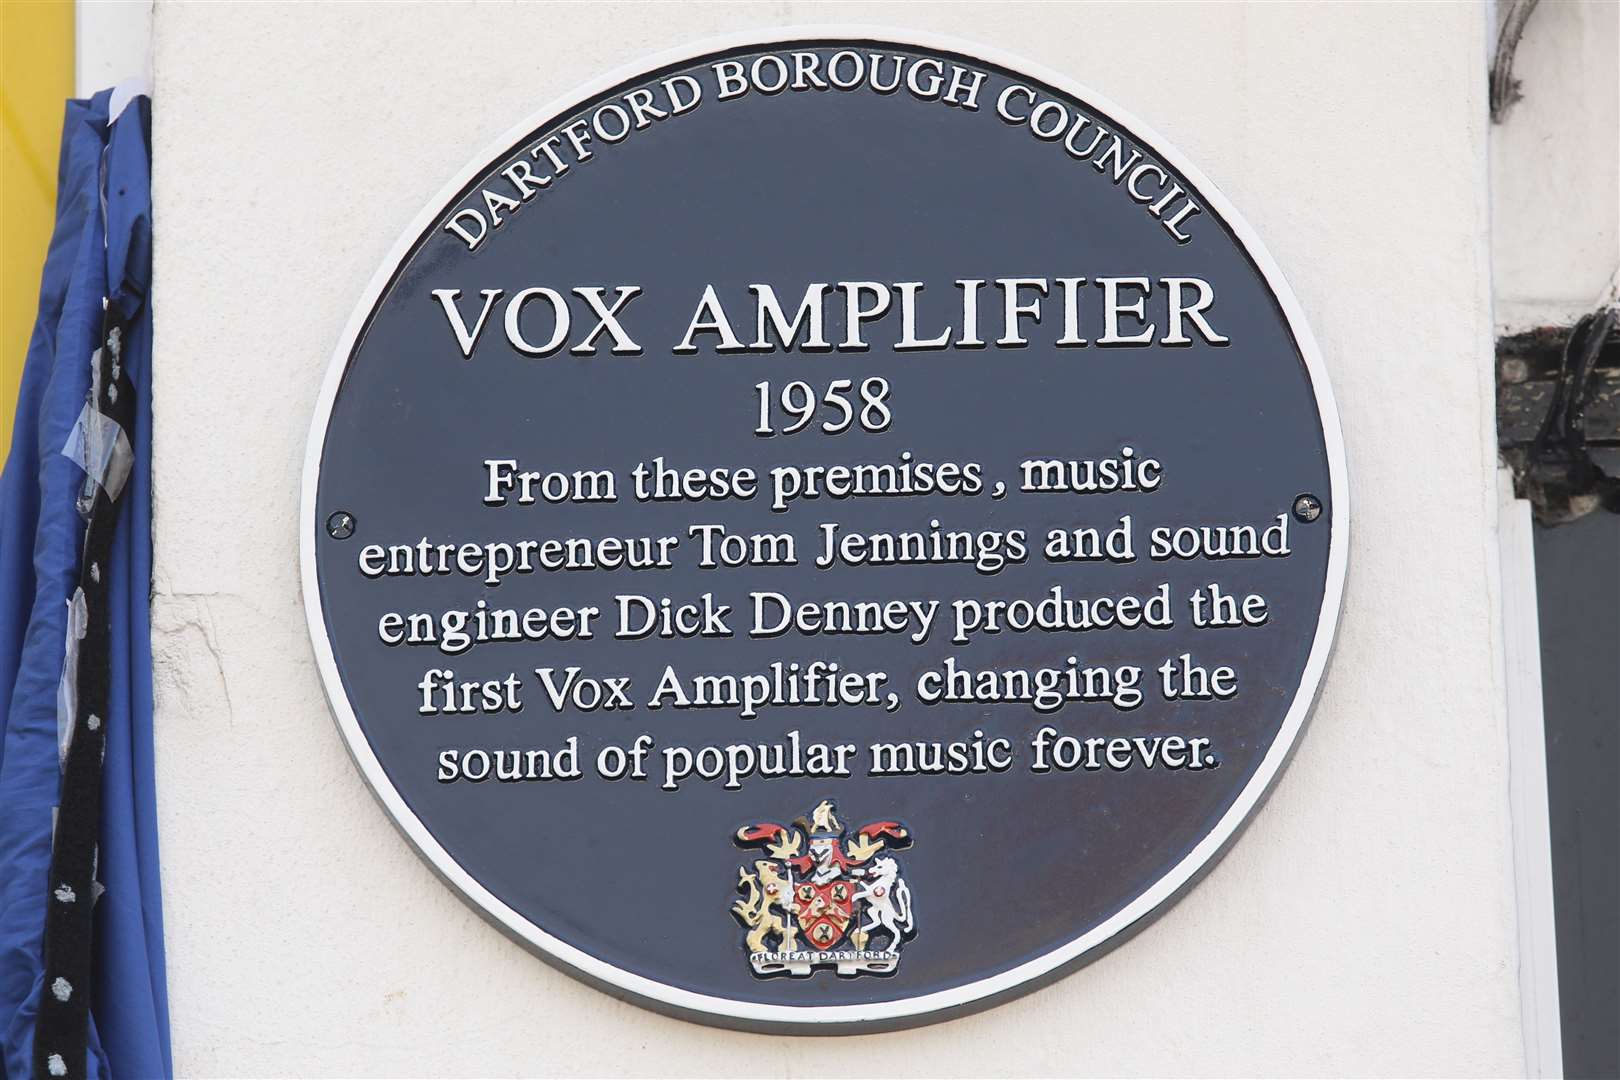 A blue plaque to commemorate the buildings that Vox used to be in at Dartford. Photo: John Westhrop